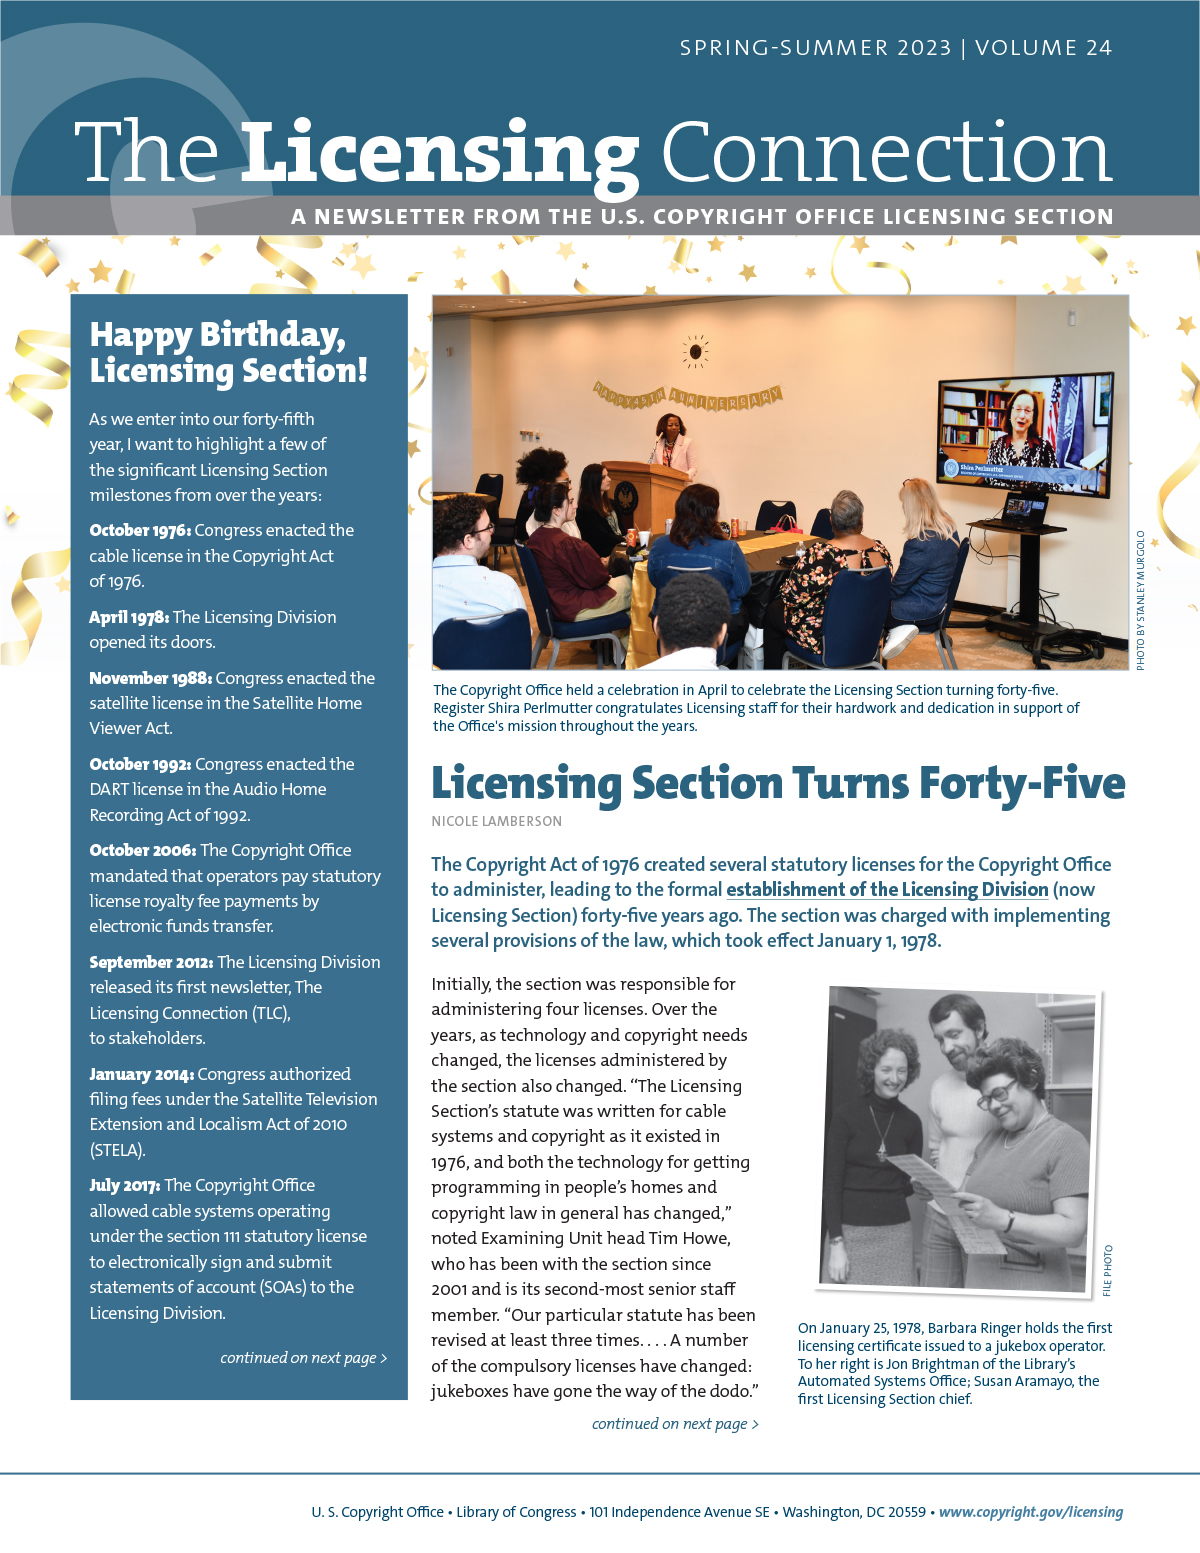 The Licensing Connection newsletter Cover